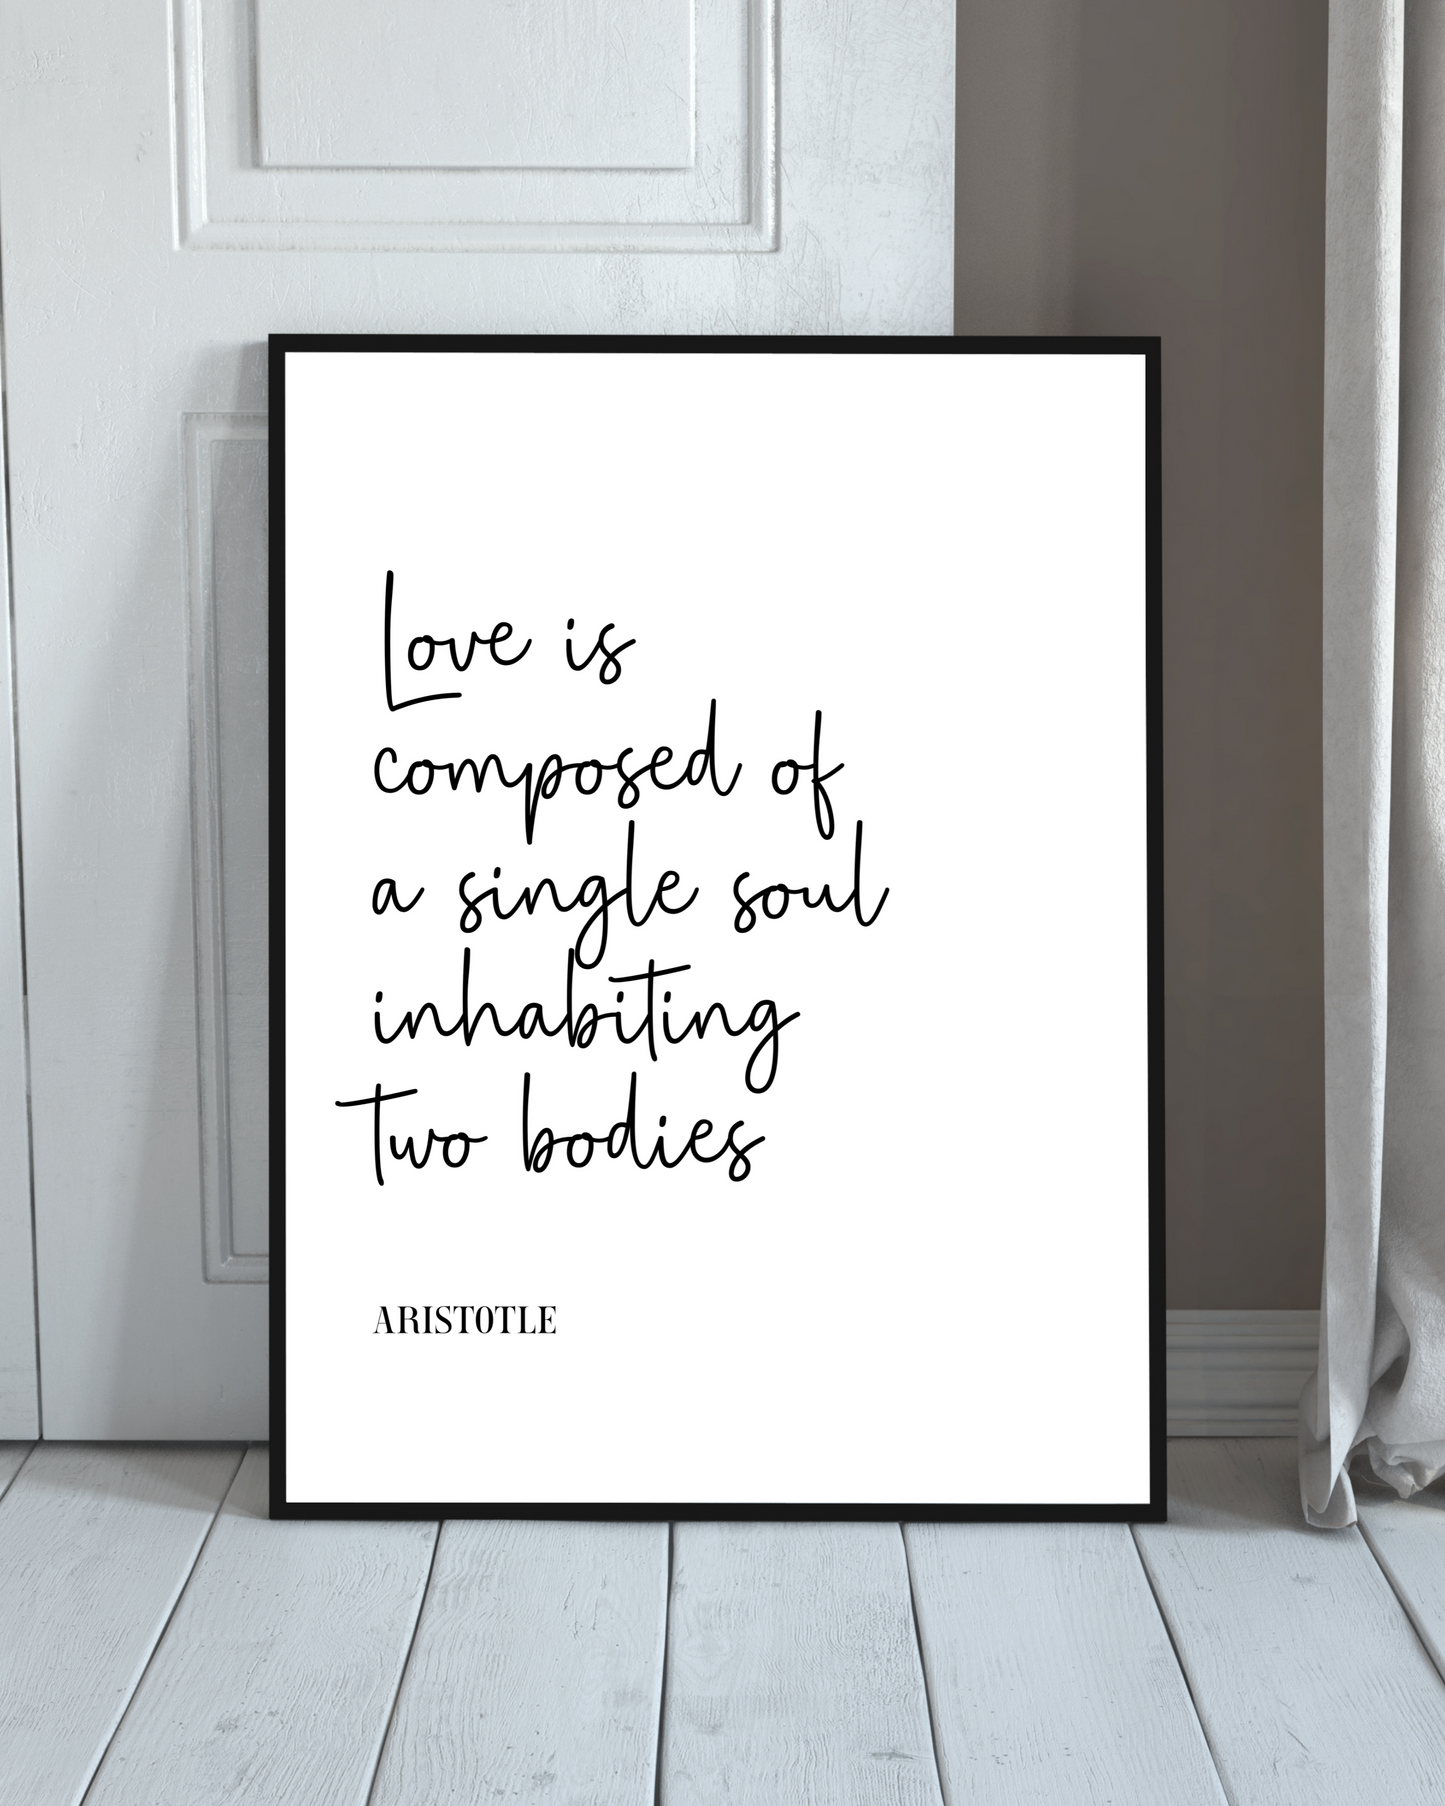 "Love Is Composed Of A Single Soul Inhabiting Two Bodies" Famous Quote By Aristotle, Love Quotes, Printable Art